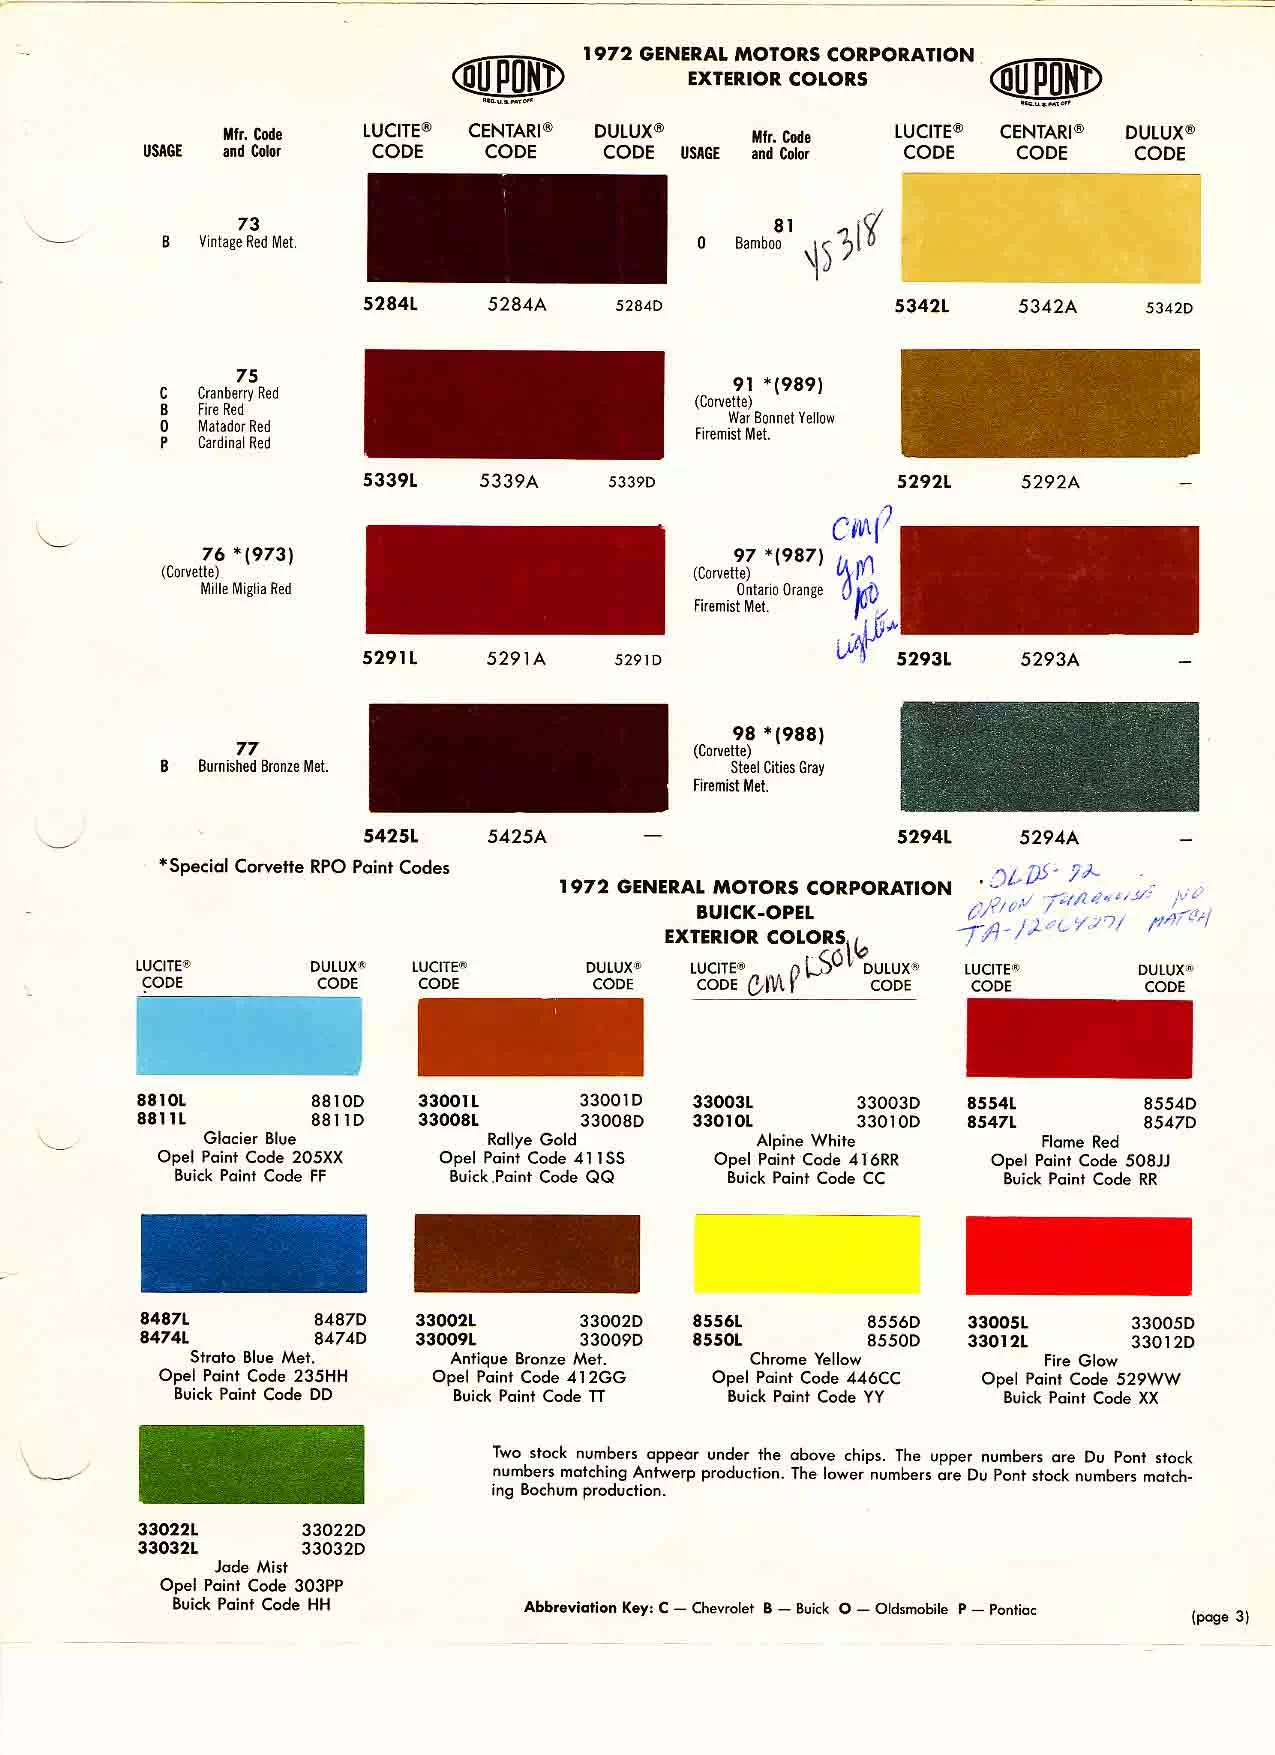 Exterior Colors and Codes used on all GM in 1972 